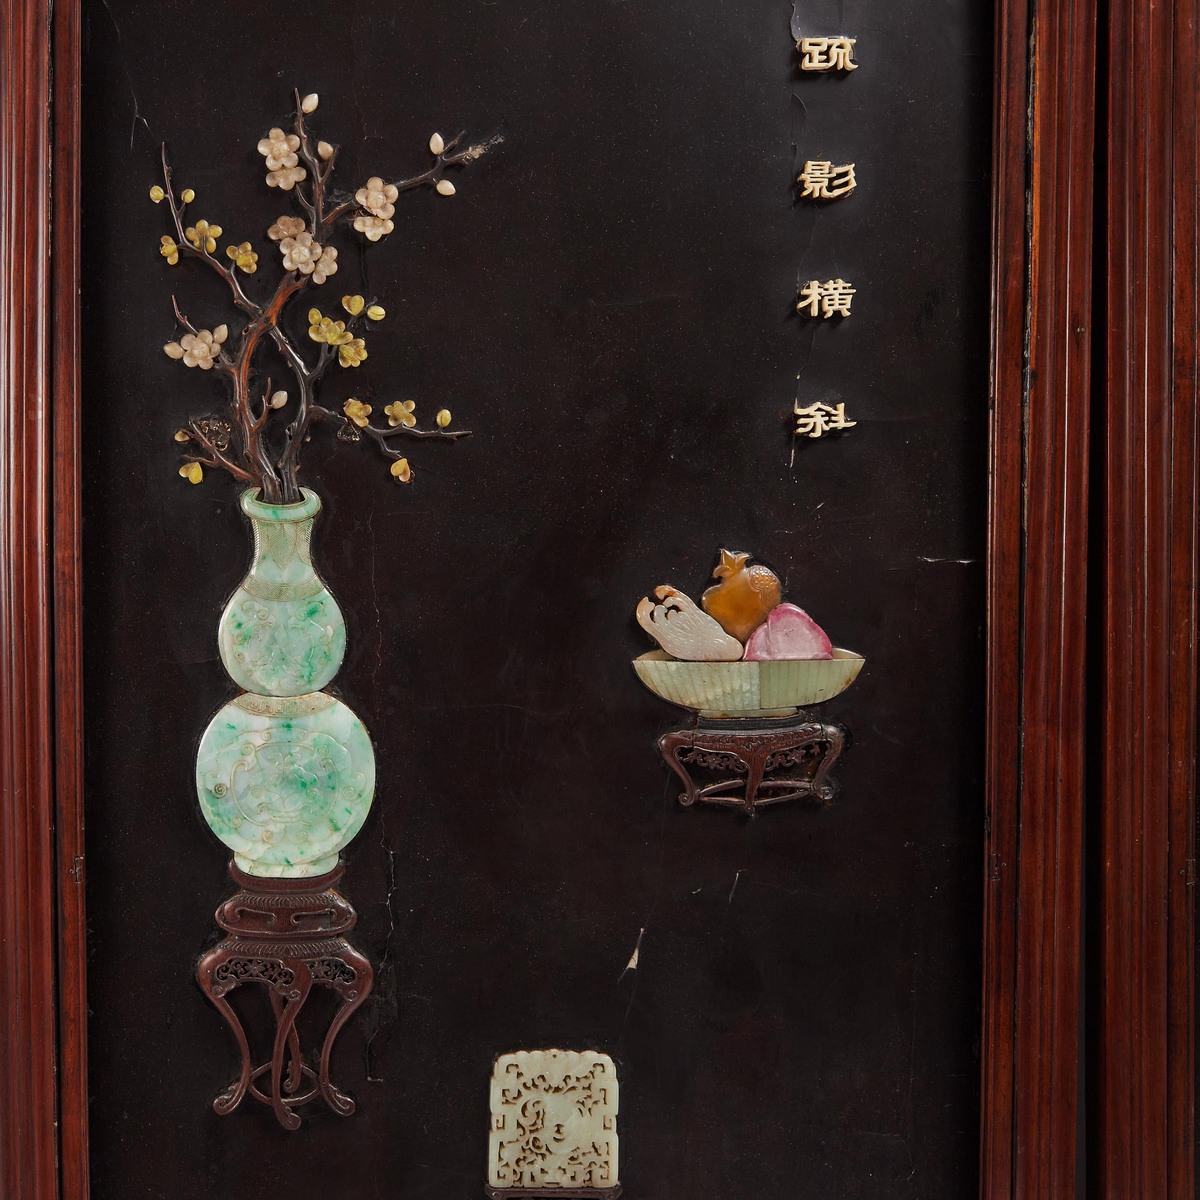 A Pair of Jade-Inlaid 'Hundred Antiques' Panels, Late Qing Dynasty, 19th Century, 清 十九世纪 黑漆嵌宝大挂屏一对, - Image 7 of 11